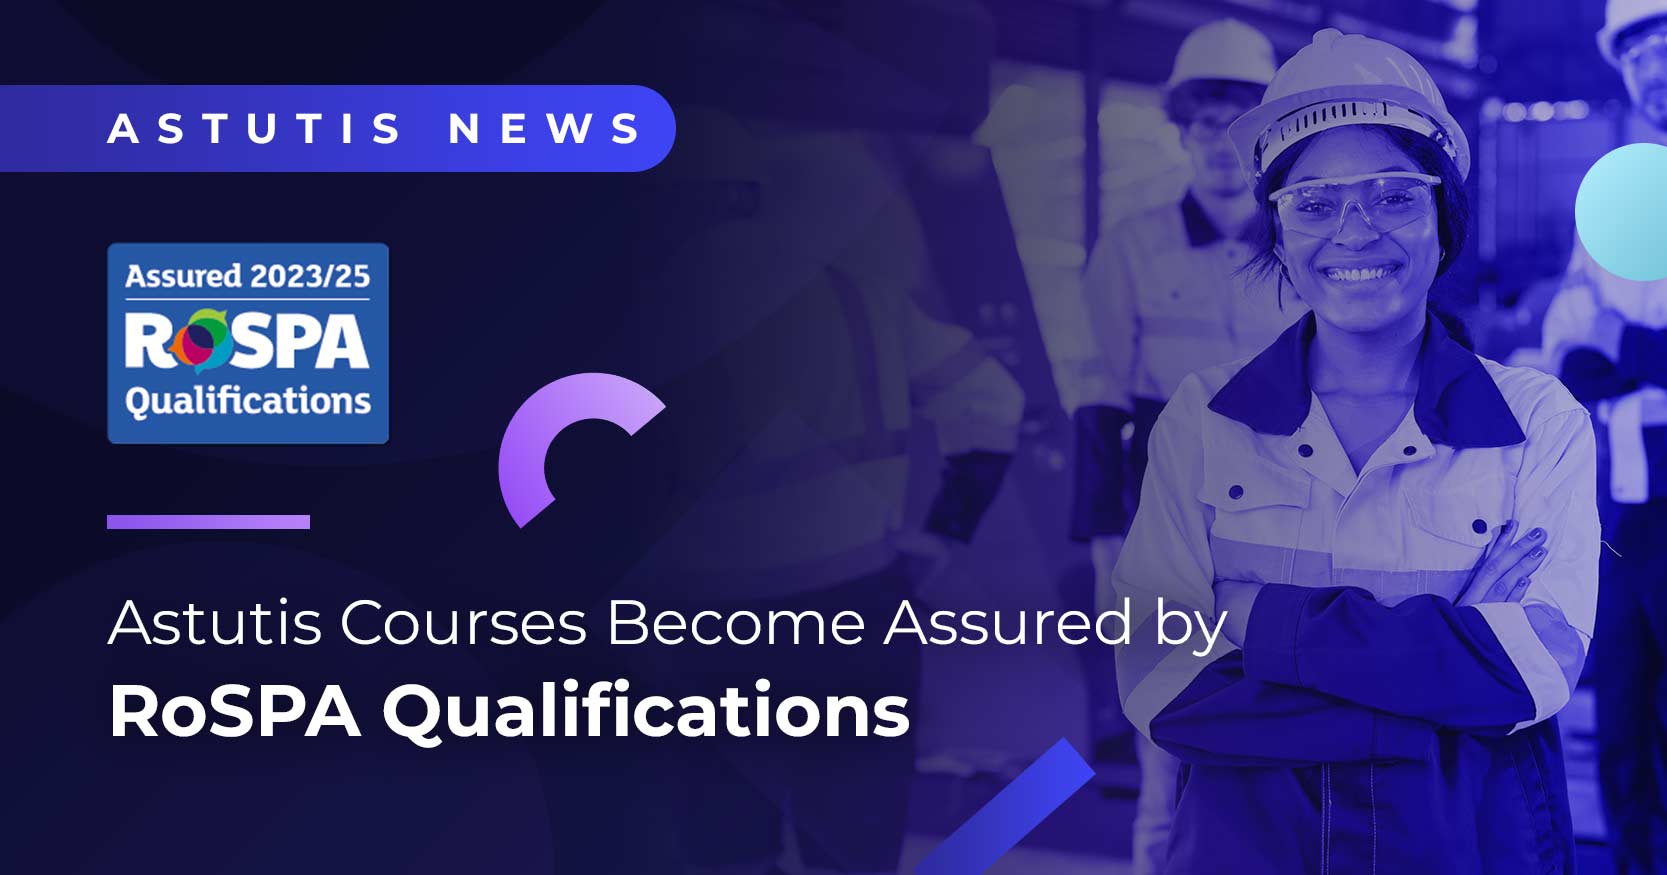 Several Astutis Courses Achieve Assured by RoSPA Qualifications Image